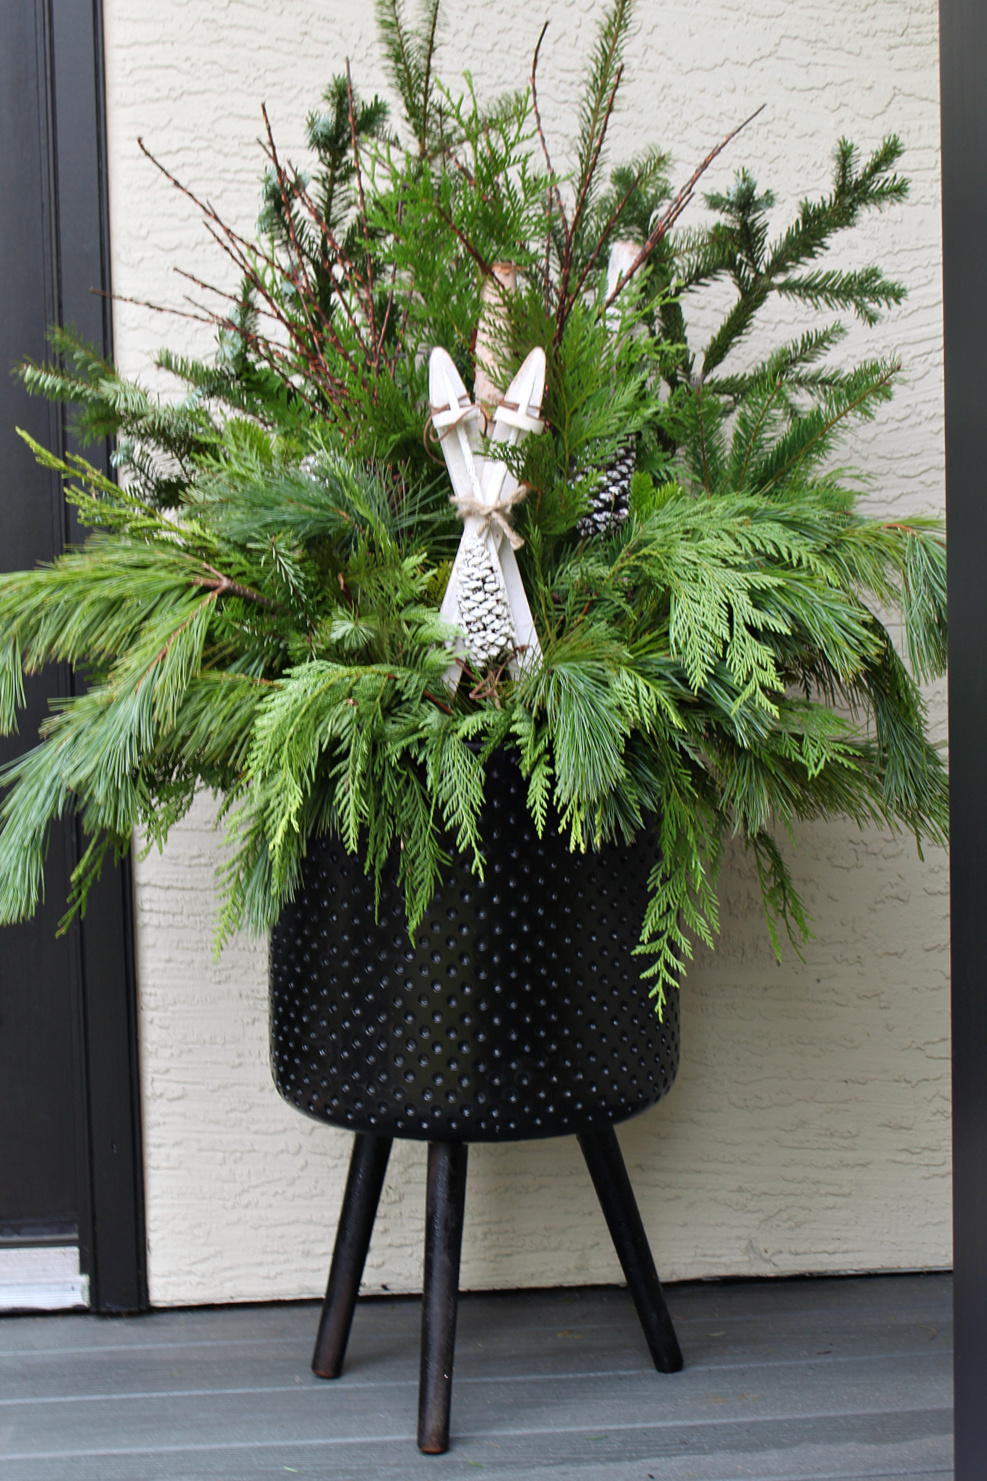 Christmas planter with fresh greenery and wood skis in a black planter.